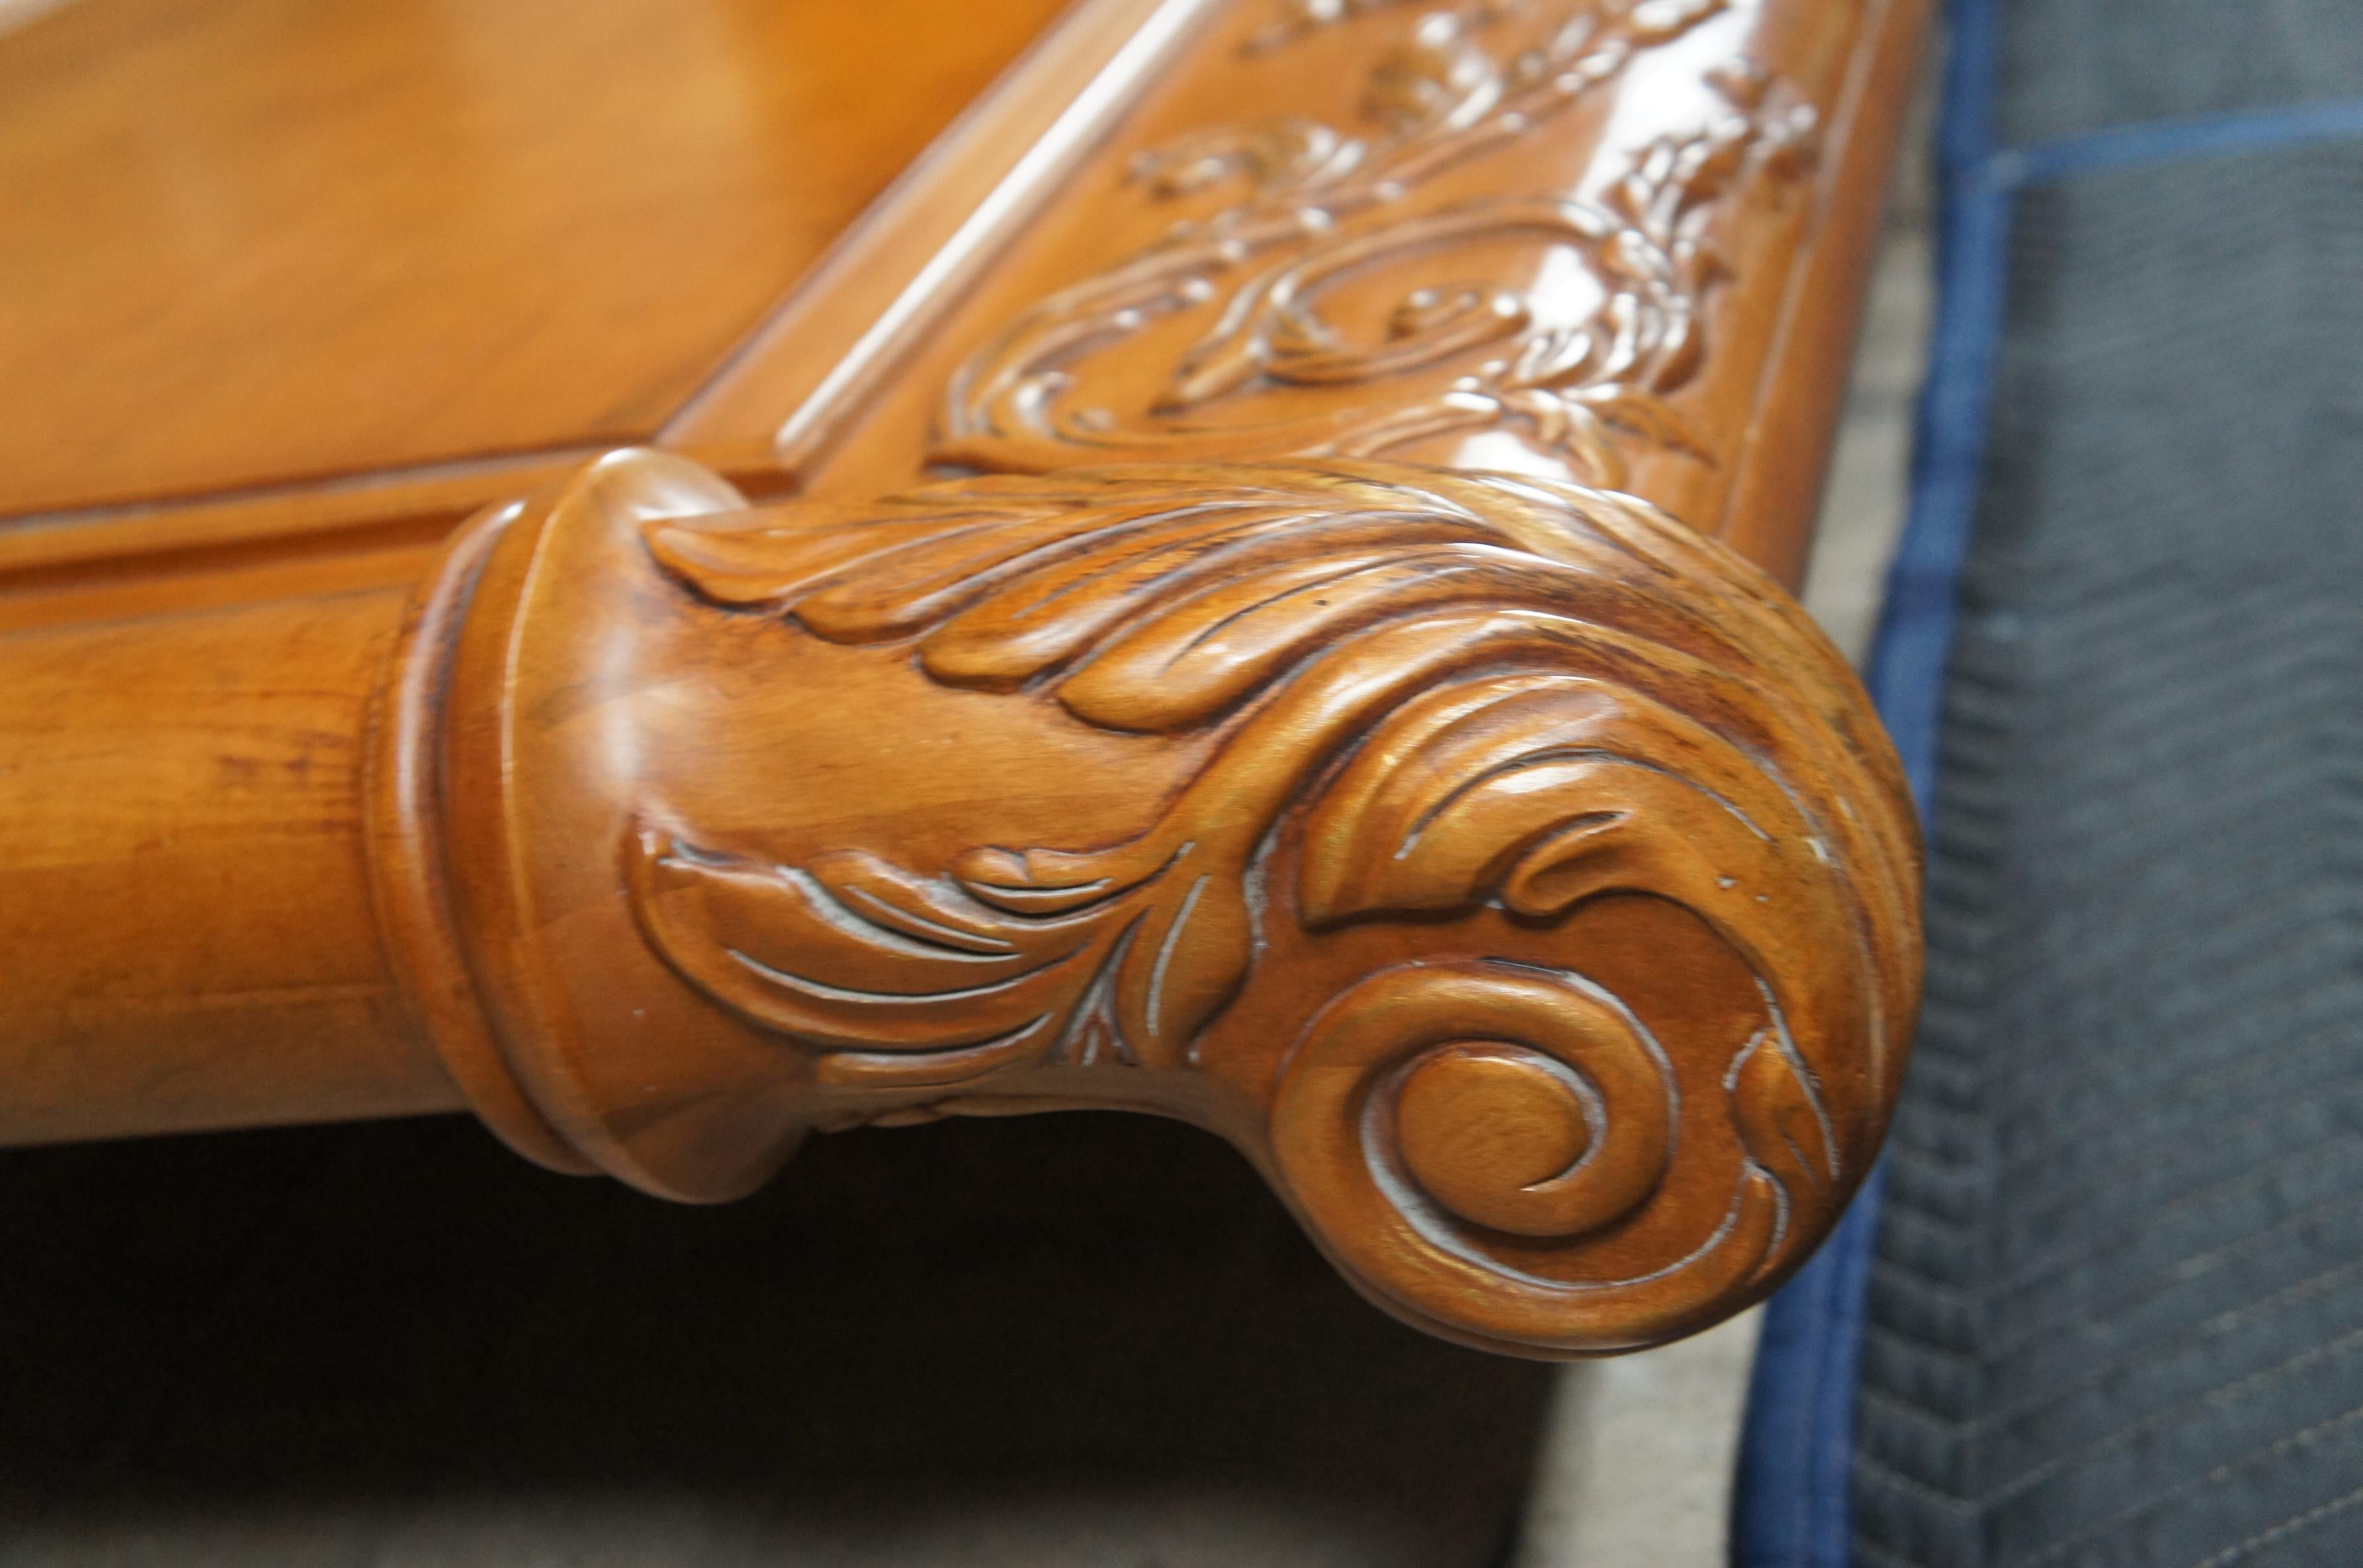 20th Century Century Furniture English Chippendale Style Mahogany King Sleigh Bed 461-176H